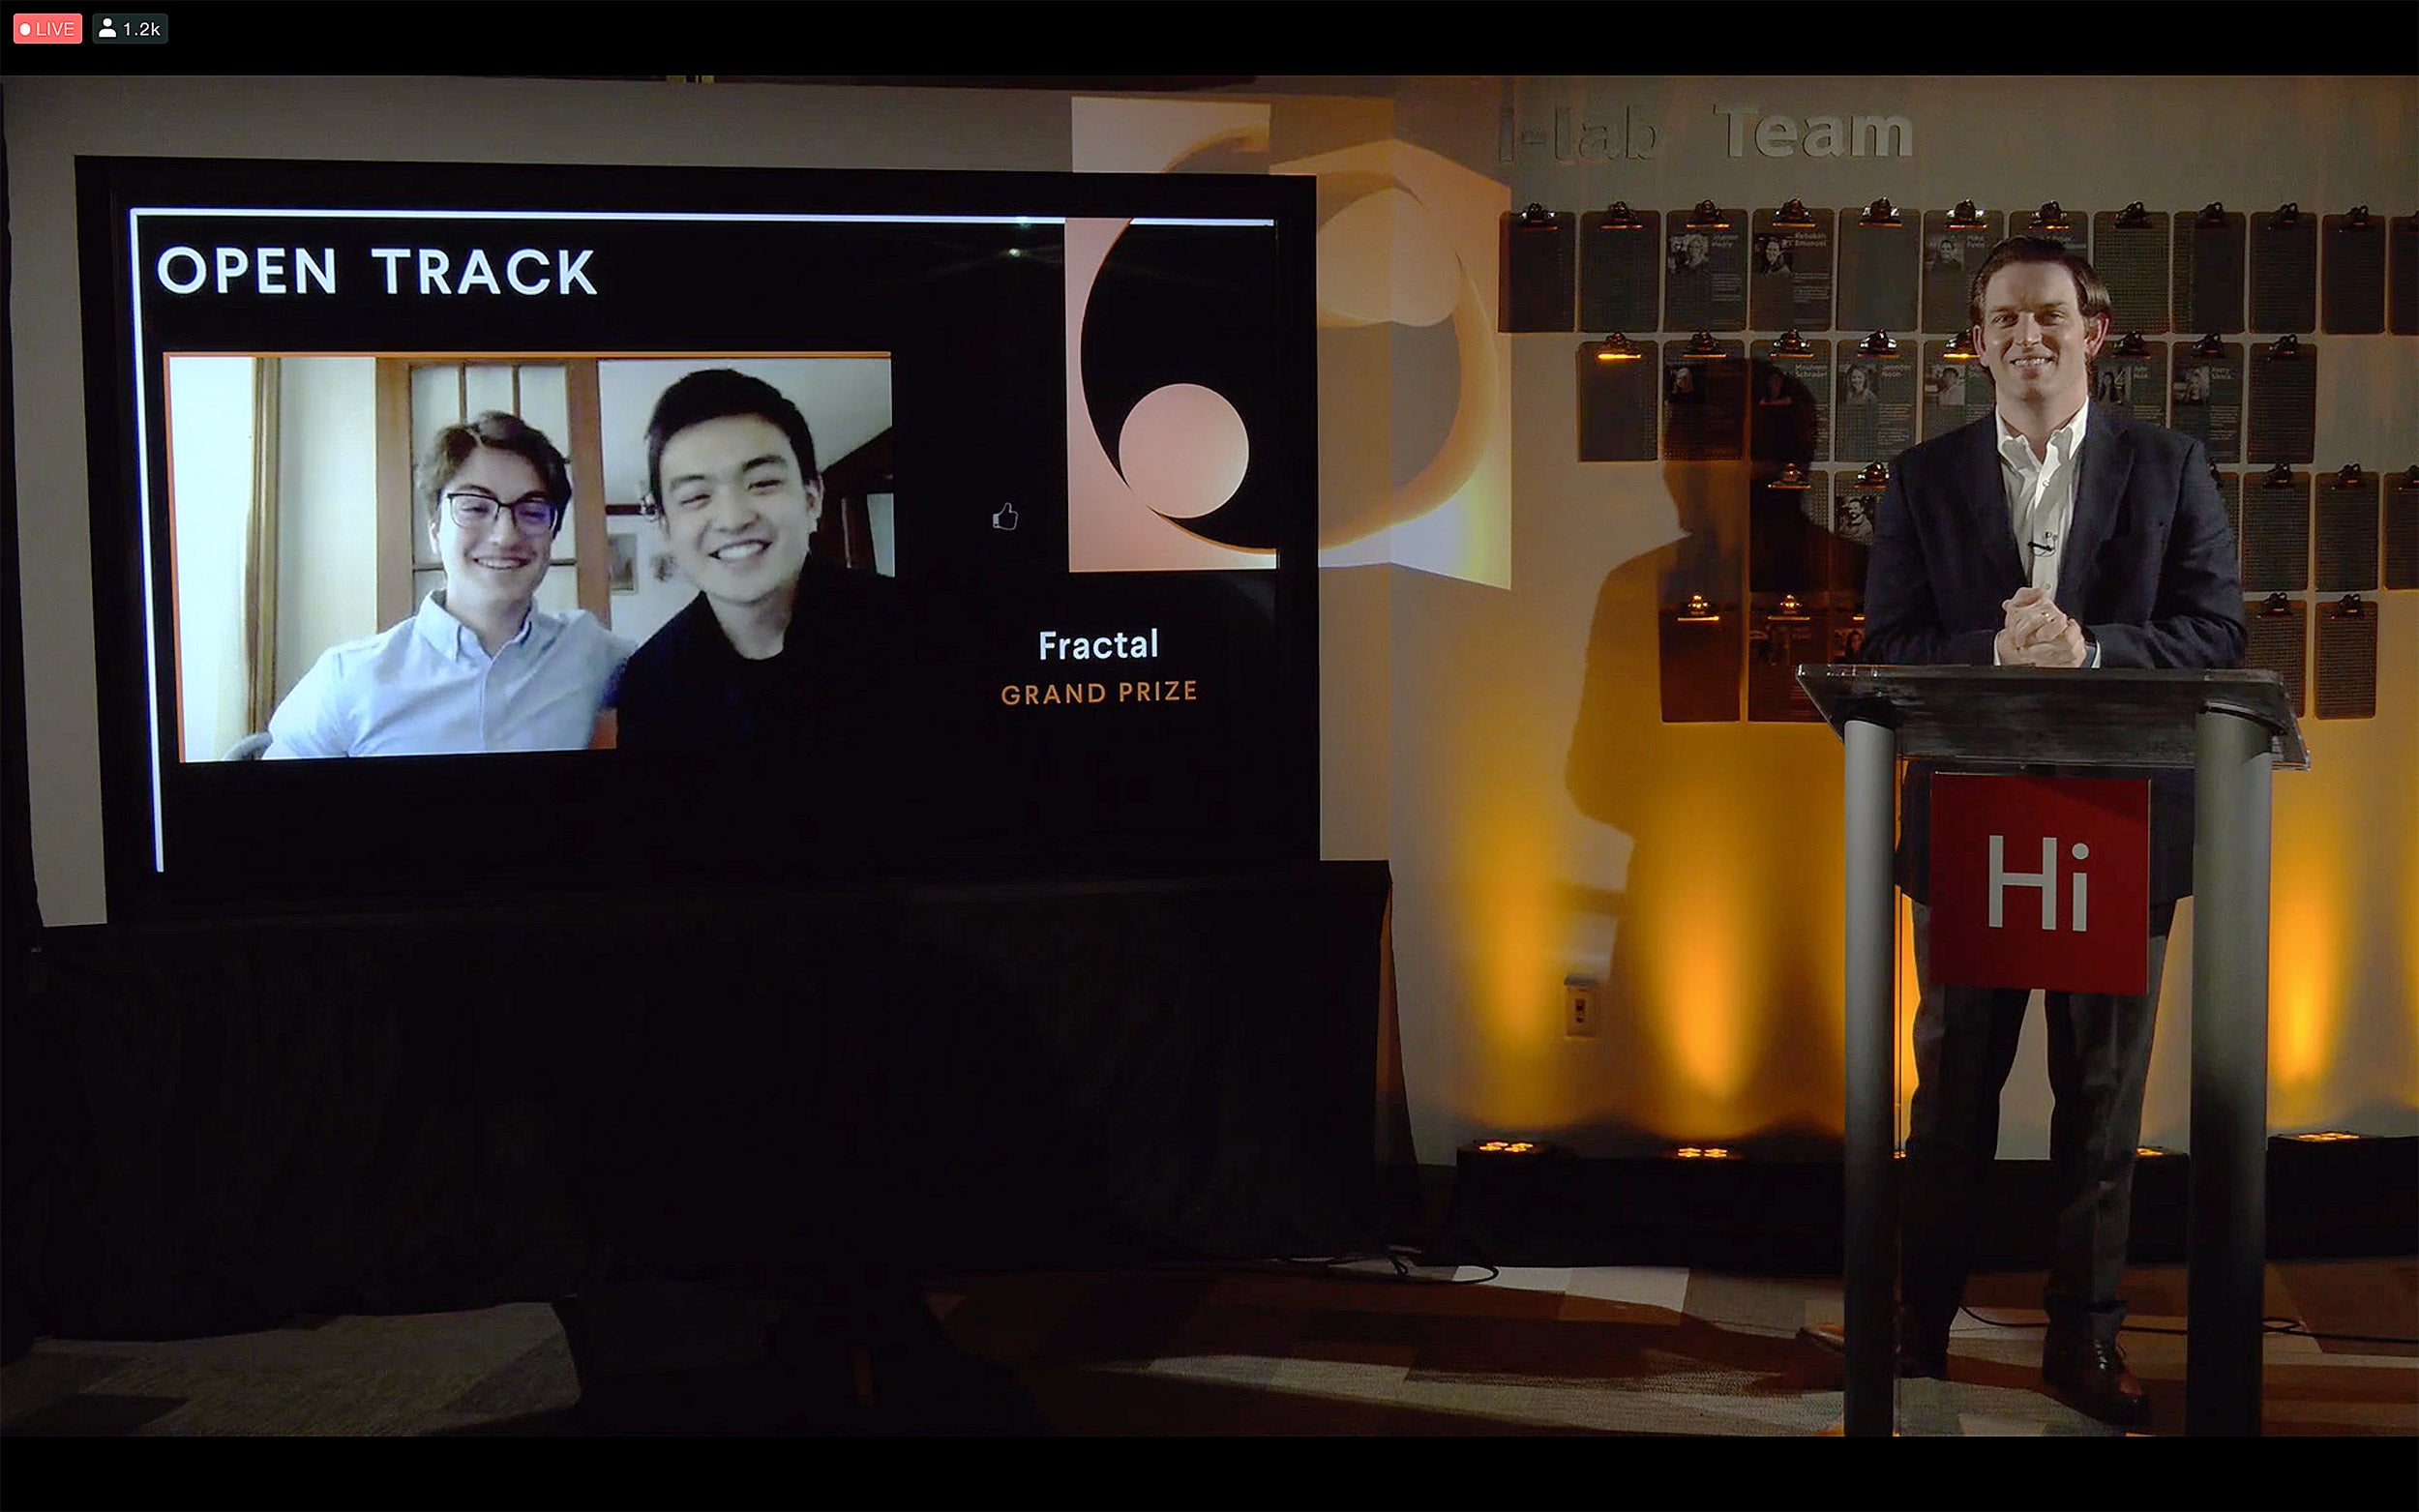 • Fractal co-founders Philippe Noel Ming Ying celebrate Open Track grand prize with team.